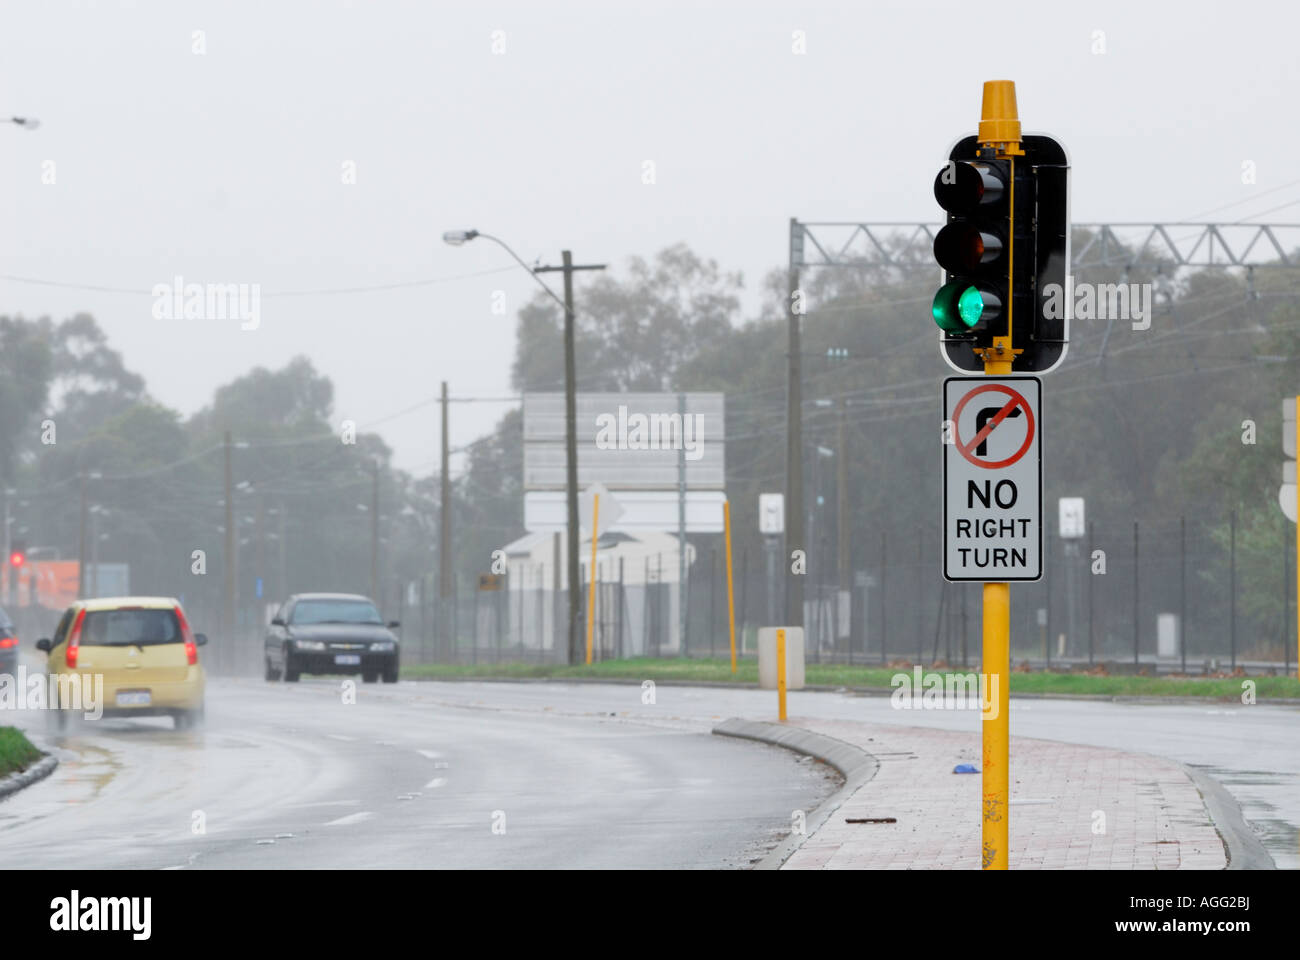 green traffic light and 'NO right turn' sign in rain Stock Photo